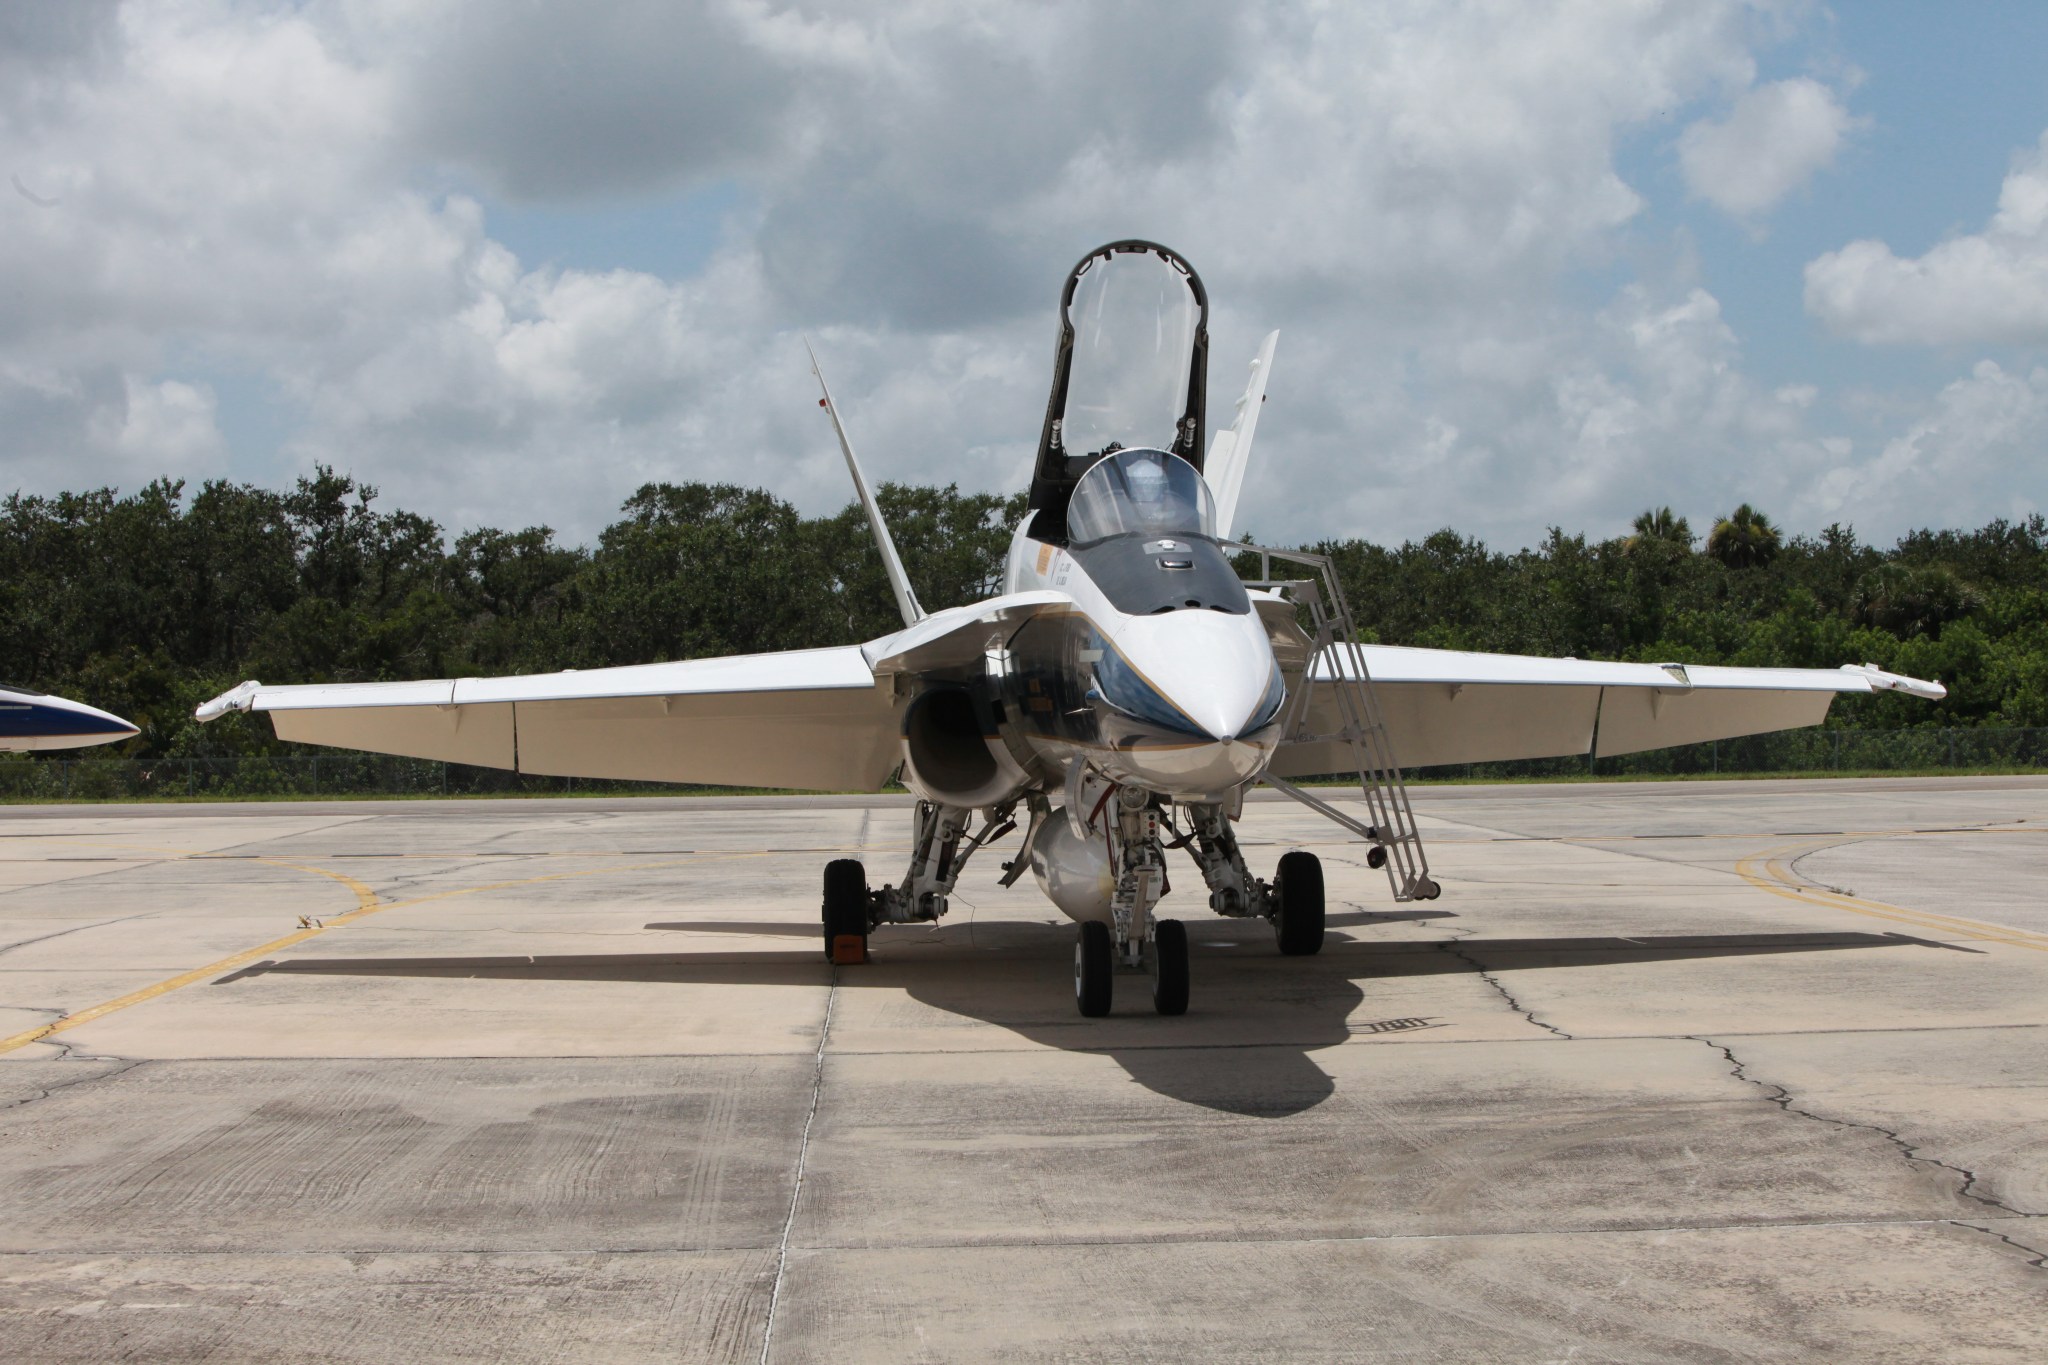 Starting on November 5, NASA will begin flying F/A-18 research aircraft to perform a special dive maneuver